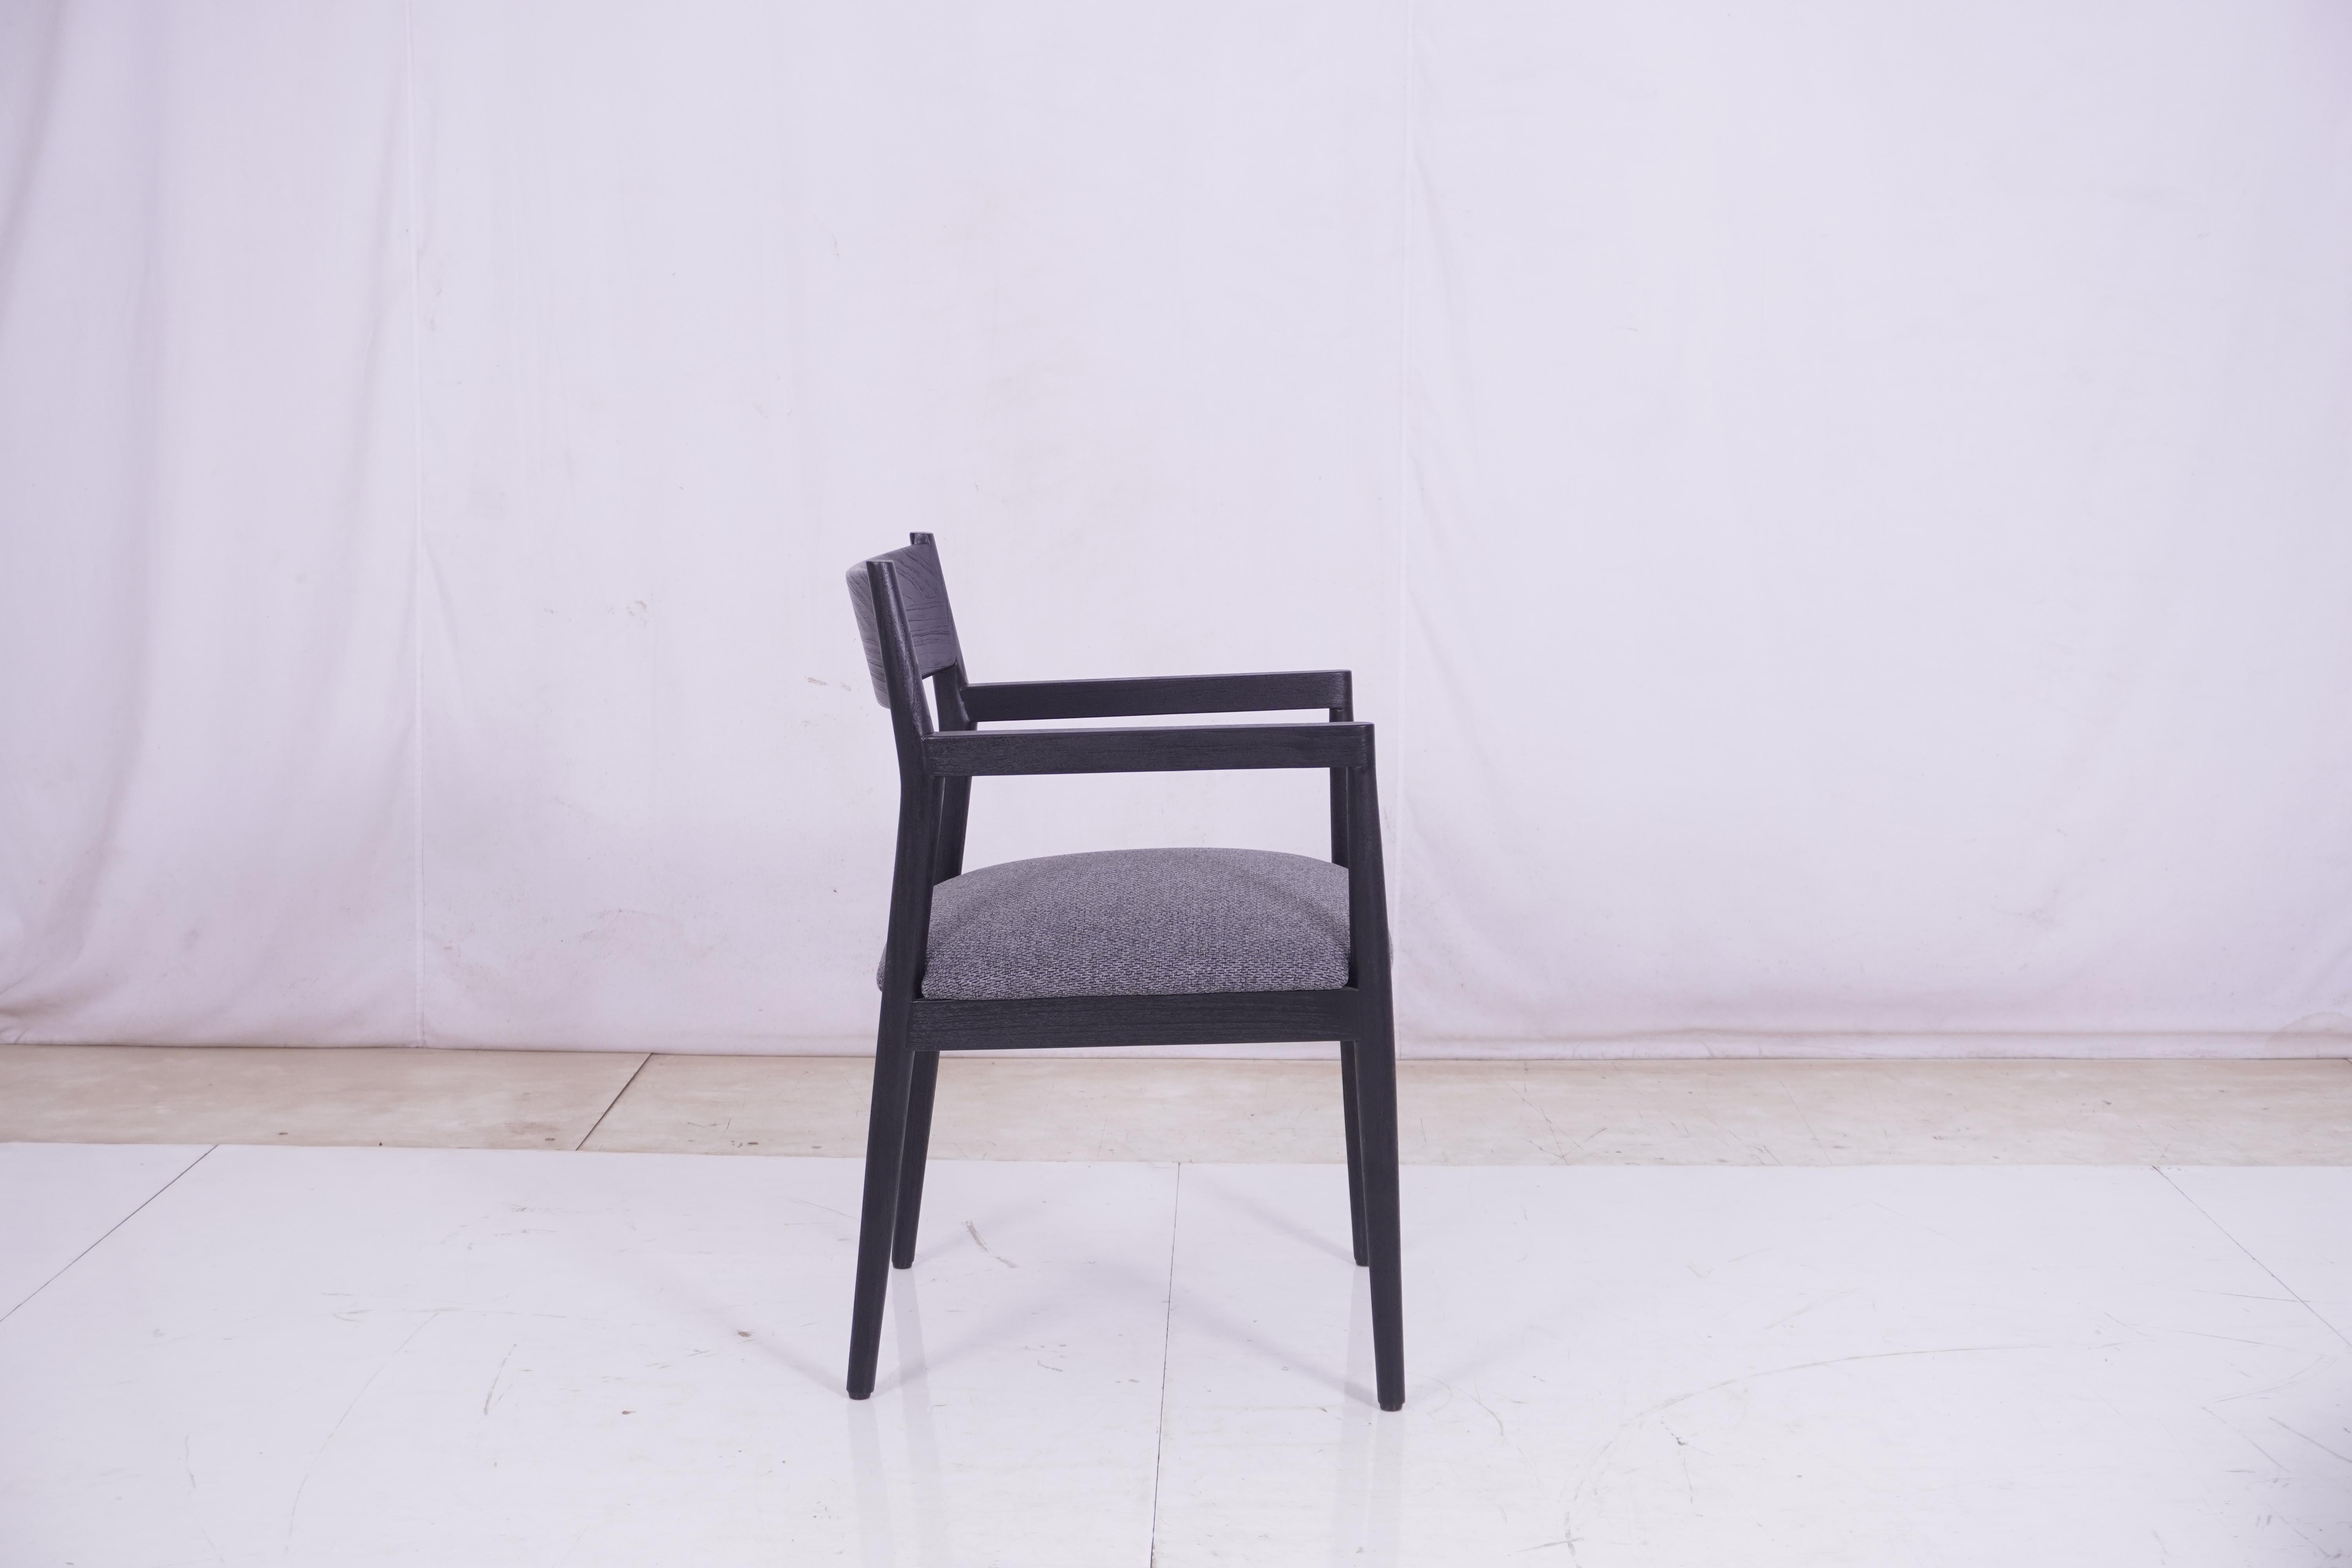 Contemporary Harper Dining Chair Armchair, Teak Wood in a Black Finish. Set of 6 chairs For Sale